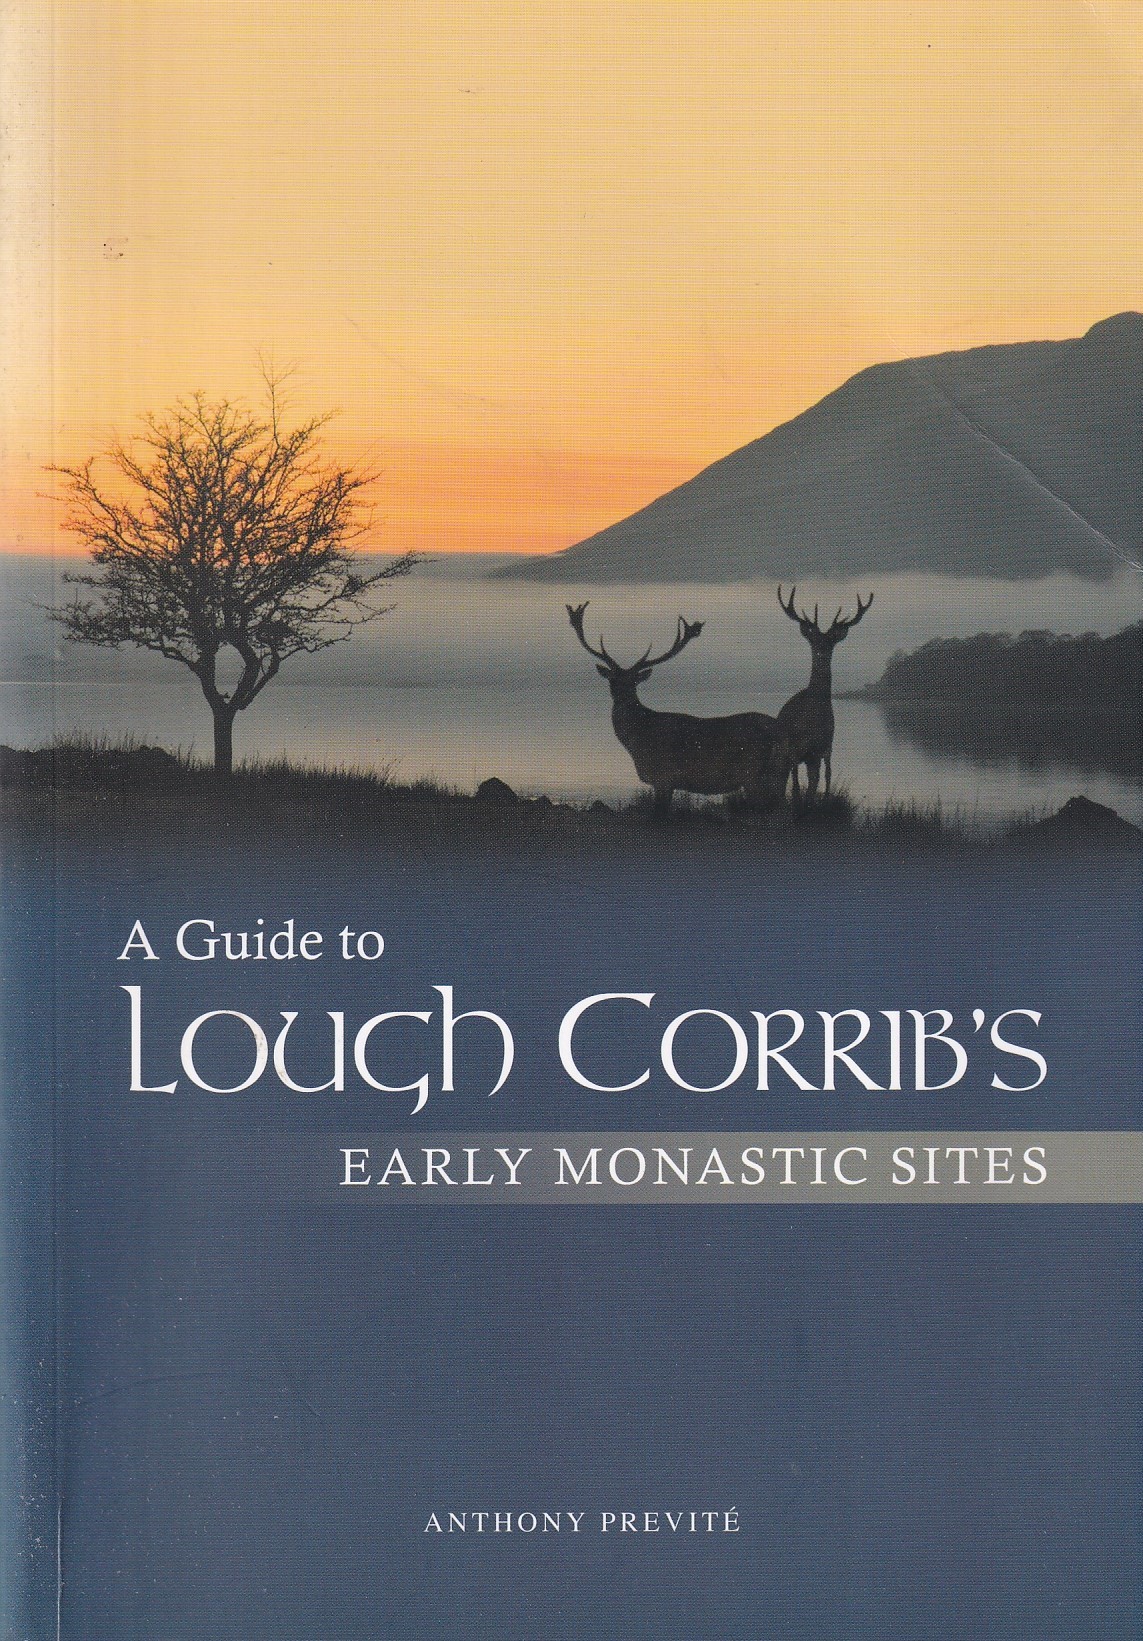 A Guide to Lough Corrib’s Early Monastic Sites [SIGNED] by Anthony Previté